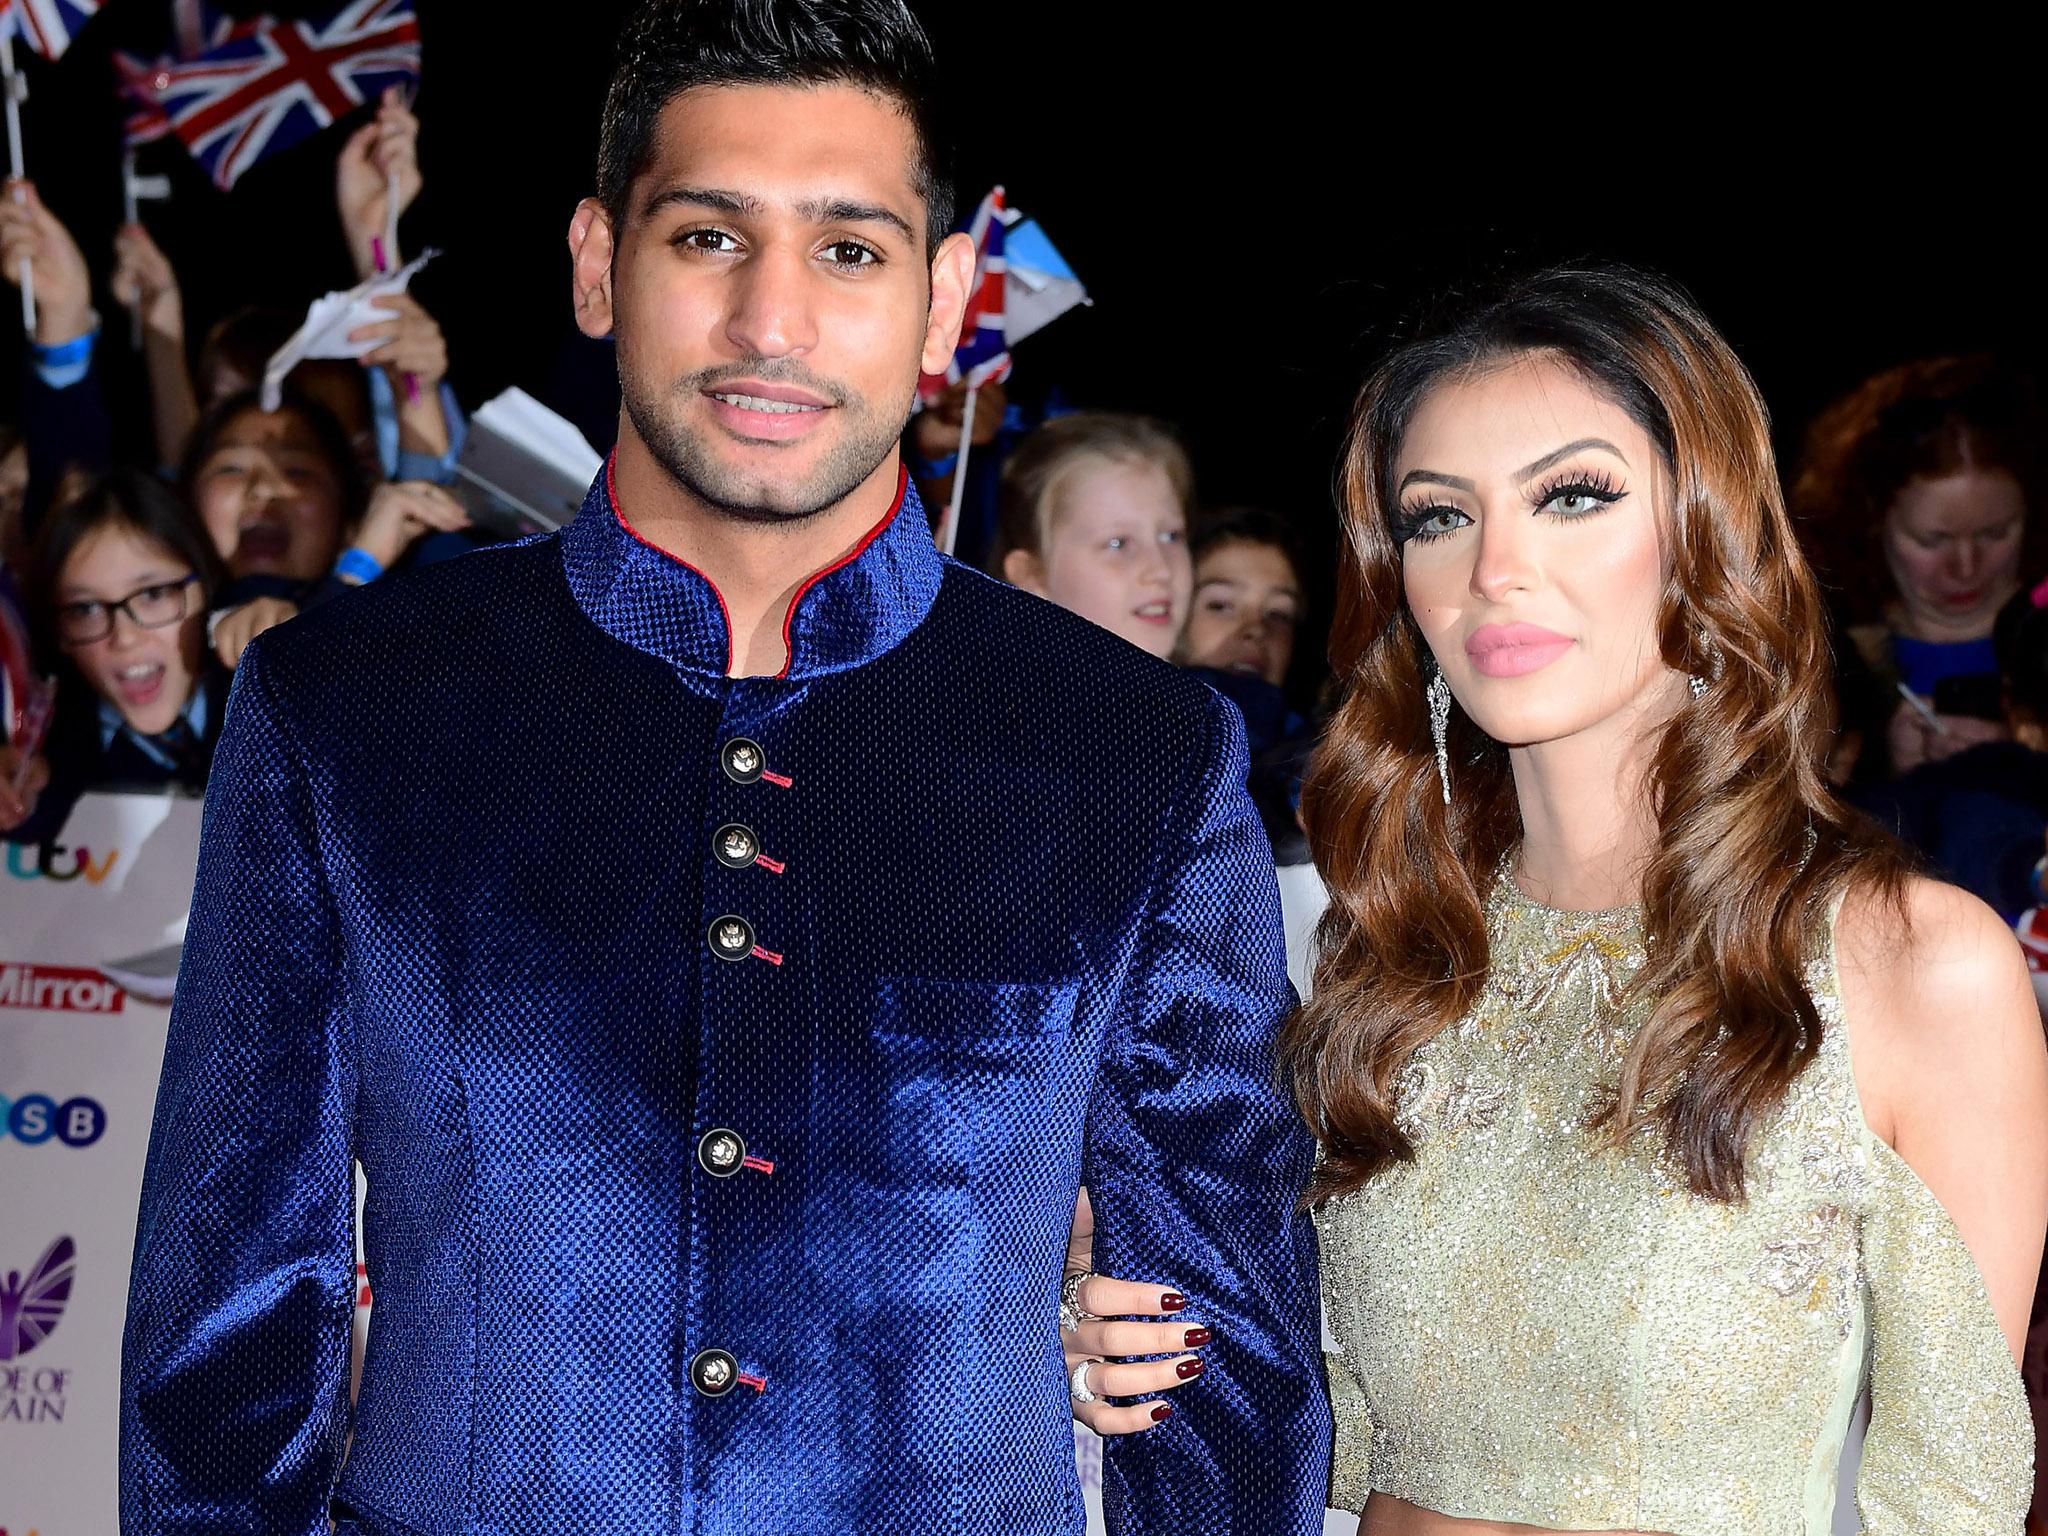 Amir Khan and Faryal Makhdoom were accosted on the street in April